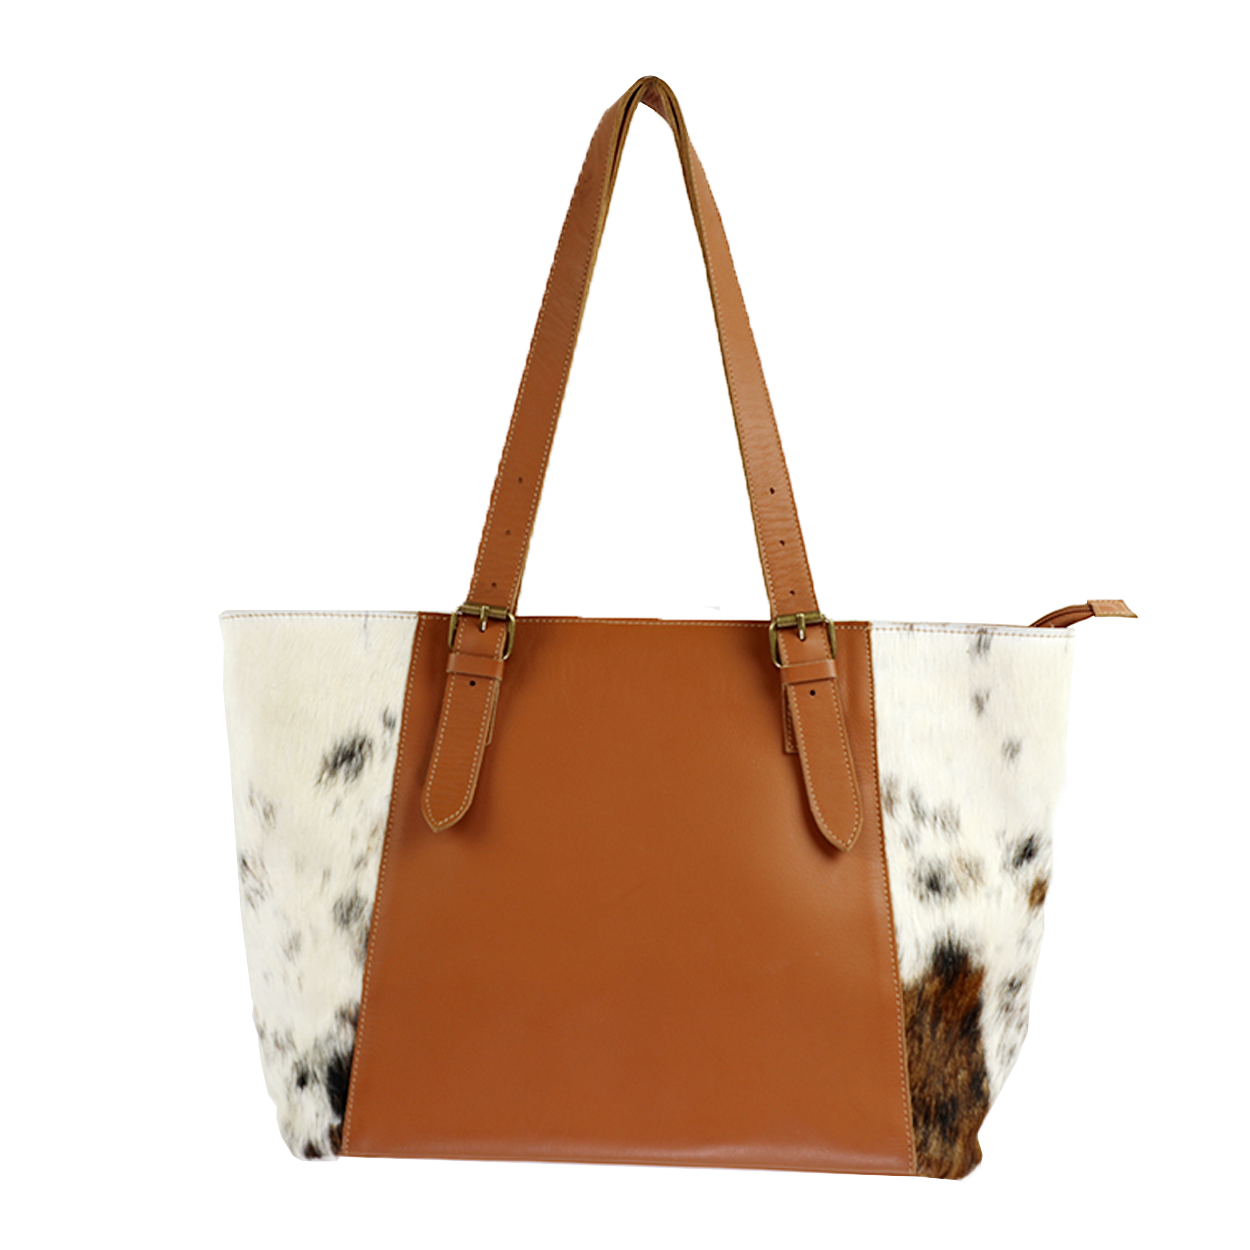 RANCHER- HANDMADE LARGE LEATHER & COWHIDE TOTE – Florida Cracker Style